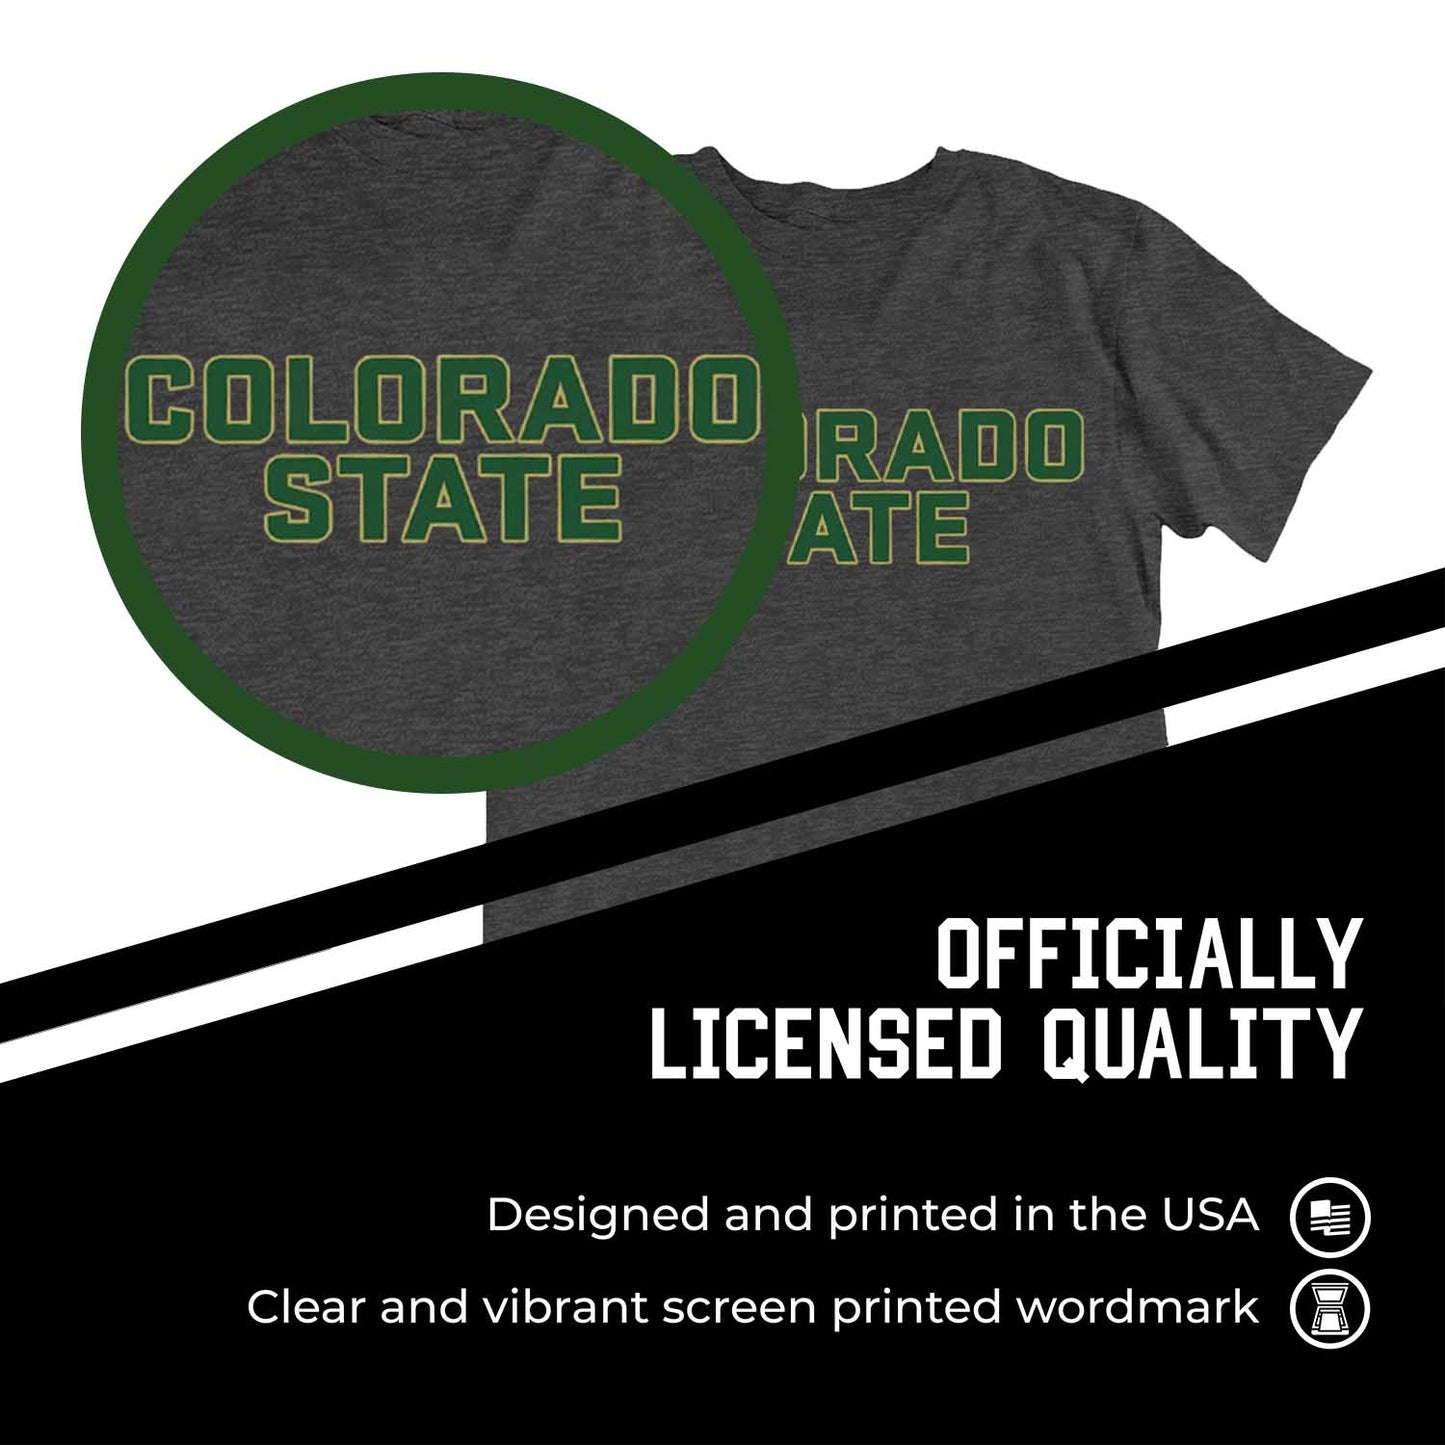 Colorado State Rams Campus Colors NCAA Adult Cotton Blend Charcoal Tagless T-Shirt - Charcoal